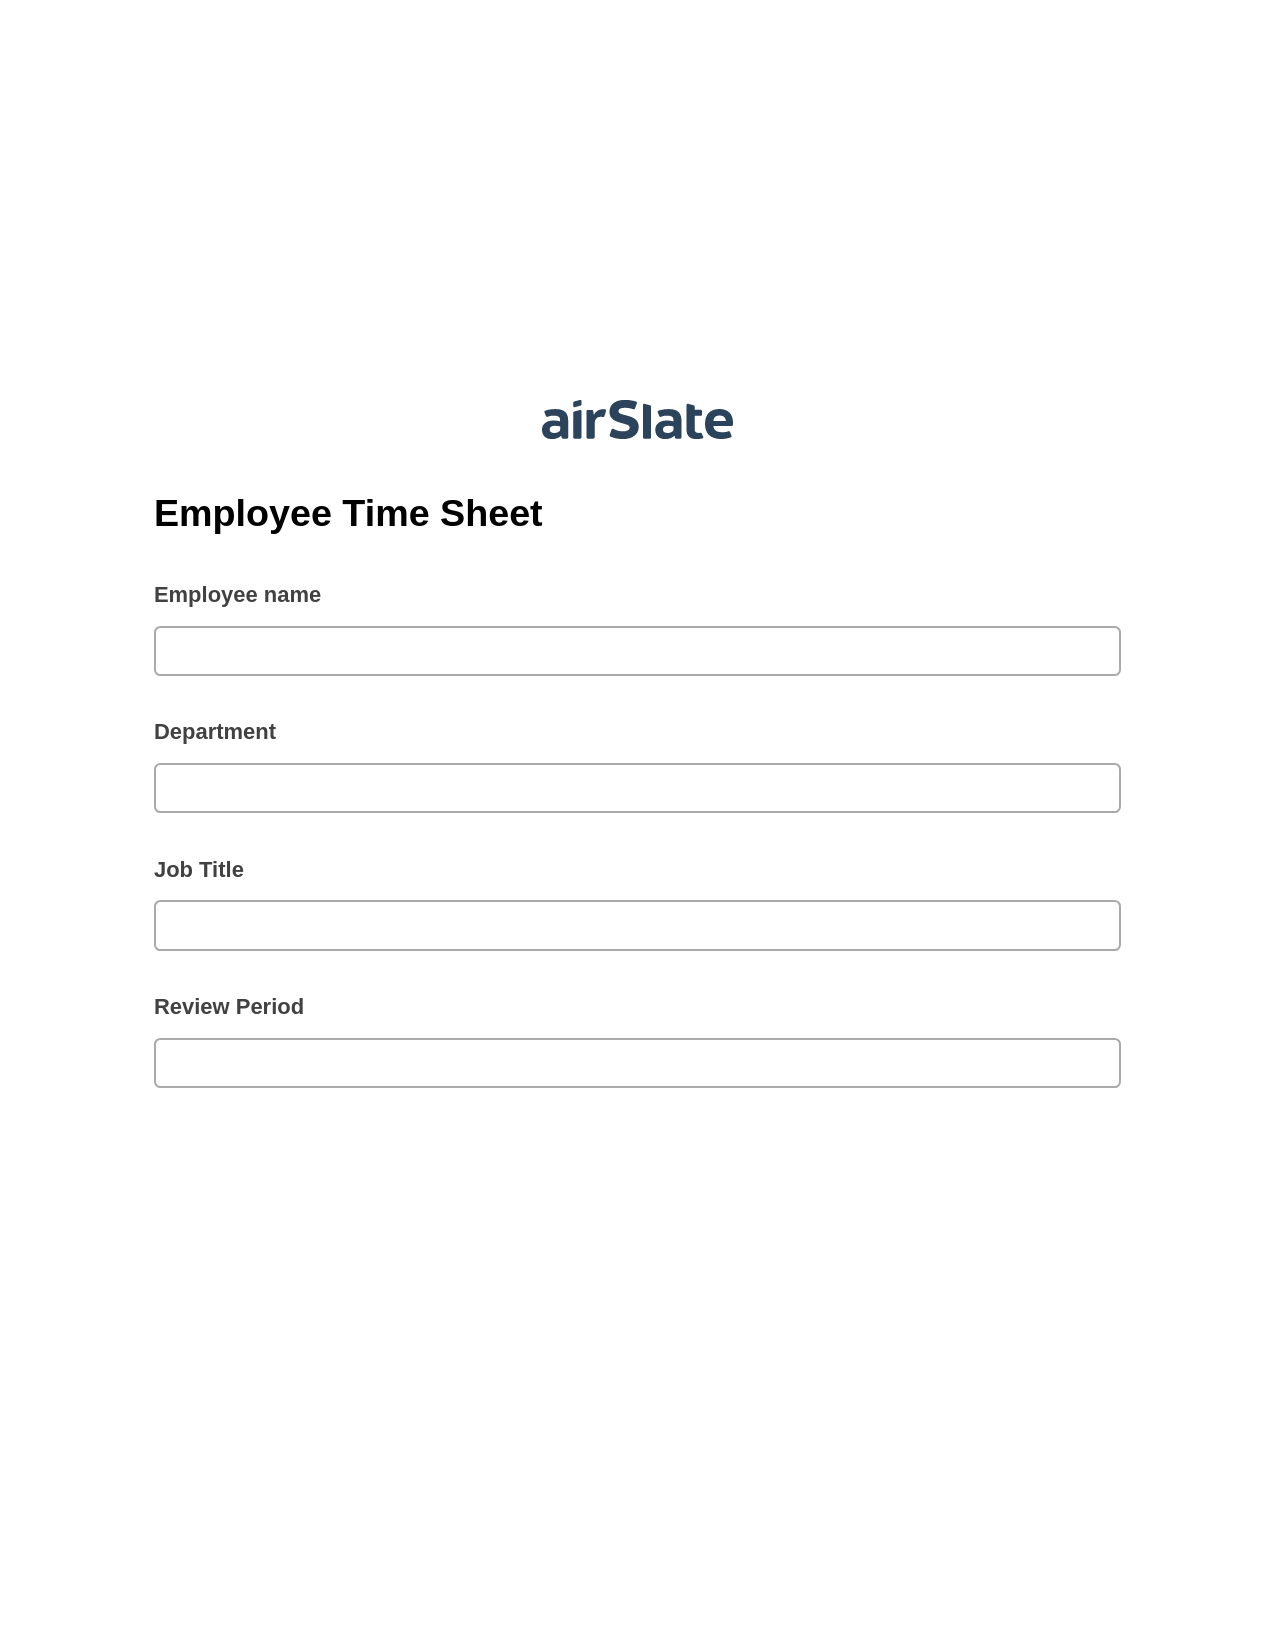 Employee Time Sheet Prefill from NetSuite records, Create Salesforce Records Bot, Archive to Dropbox Bot